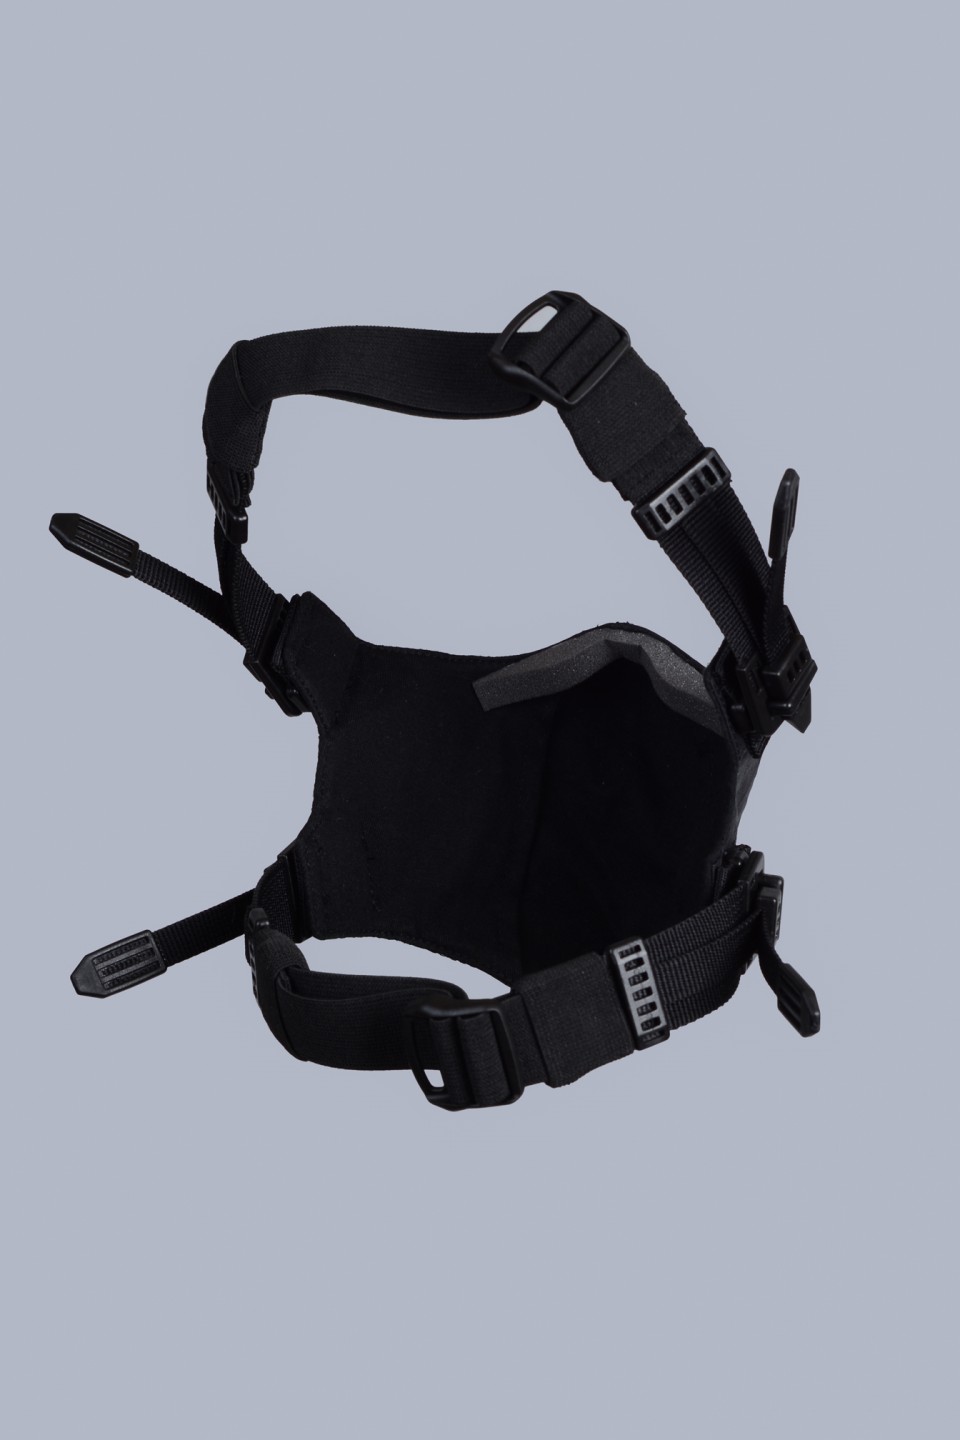 M1 face mask